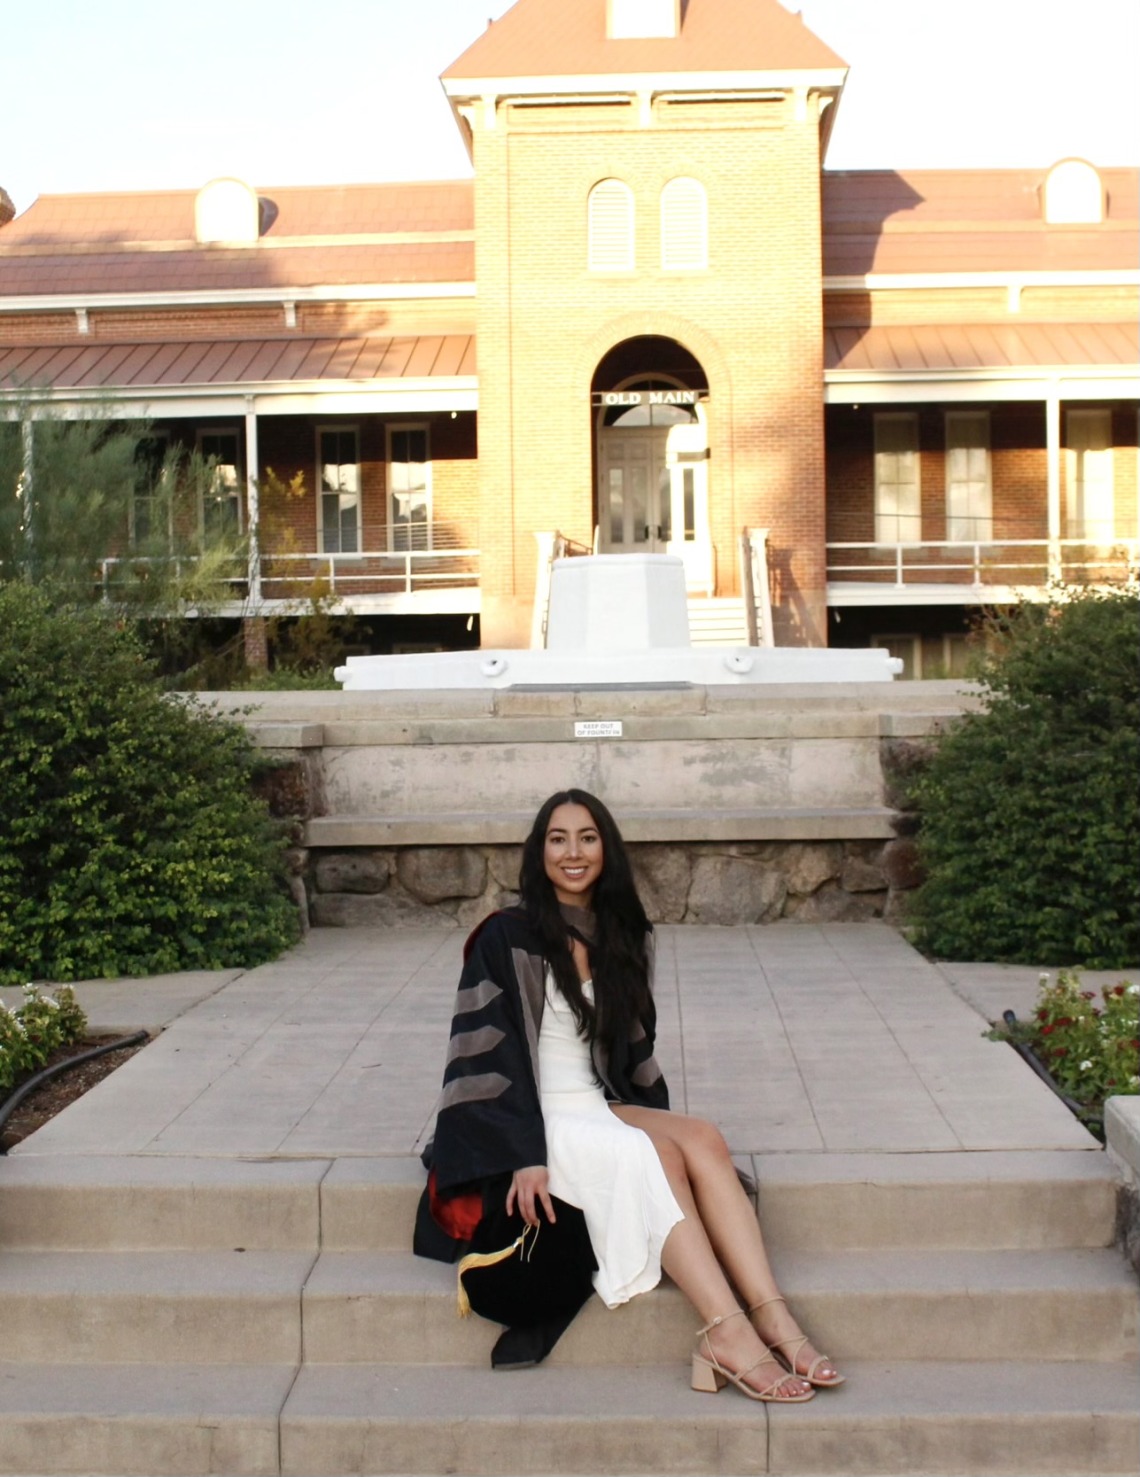 Catherine Wu wears graduation regalia and poses in front of a University of Arizona building.